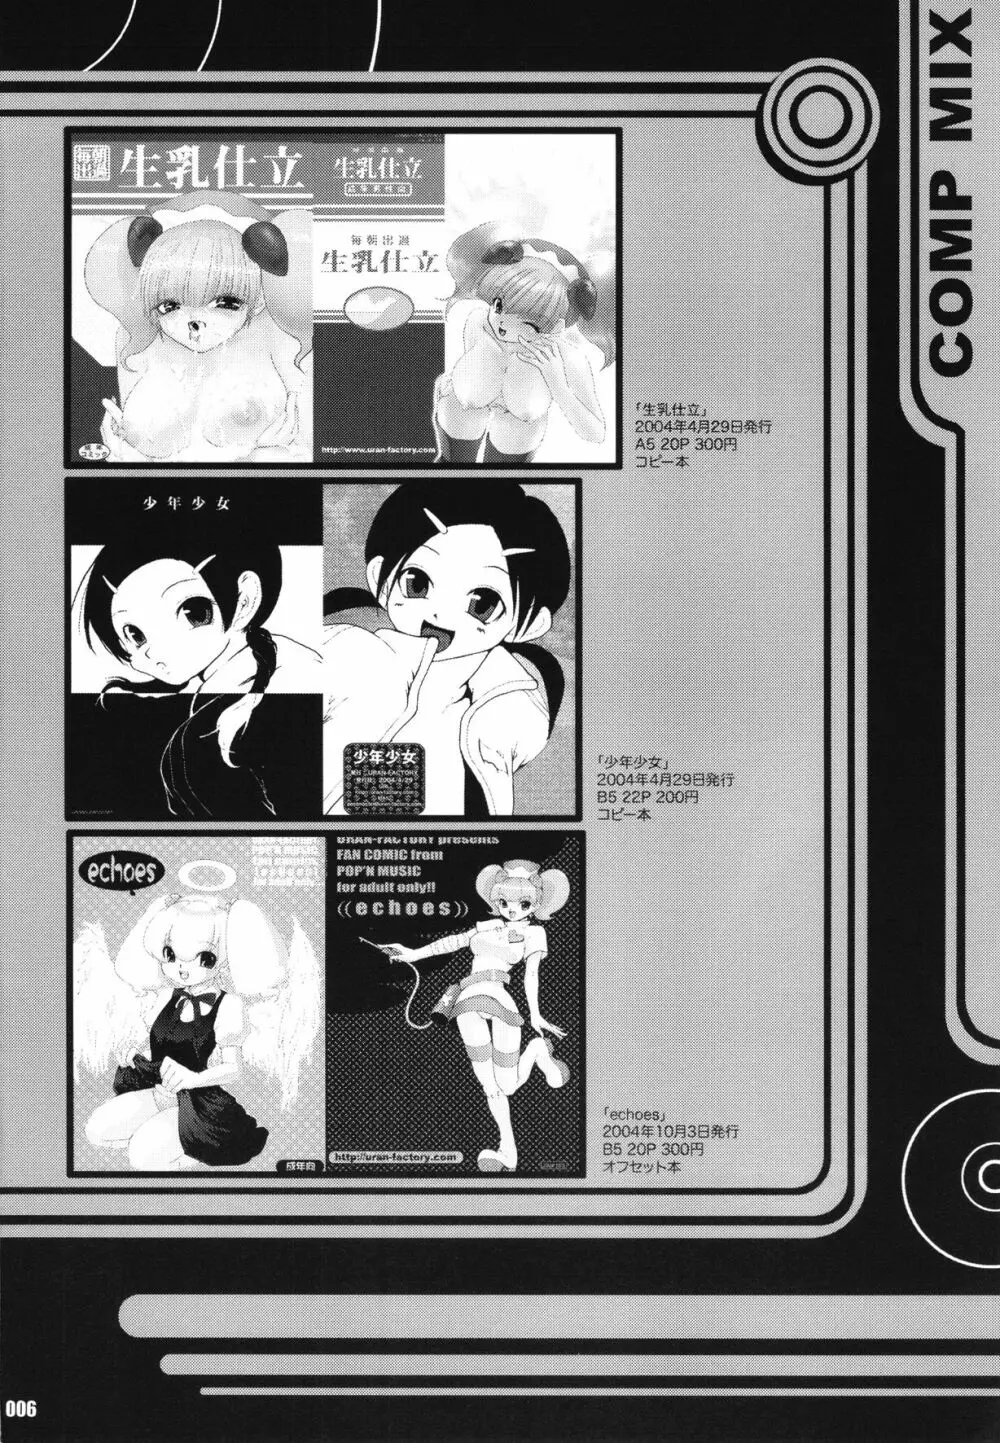 URAN-DACTORY WORKs 2004 special COMP MIX Page.5